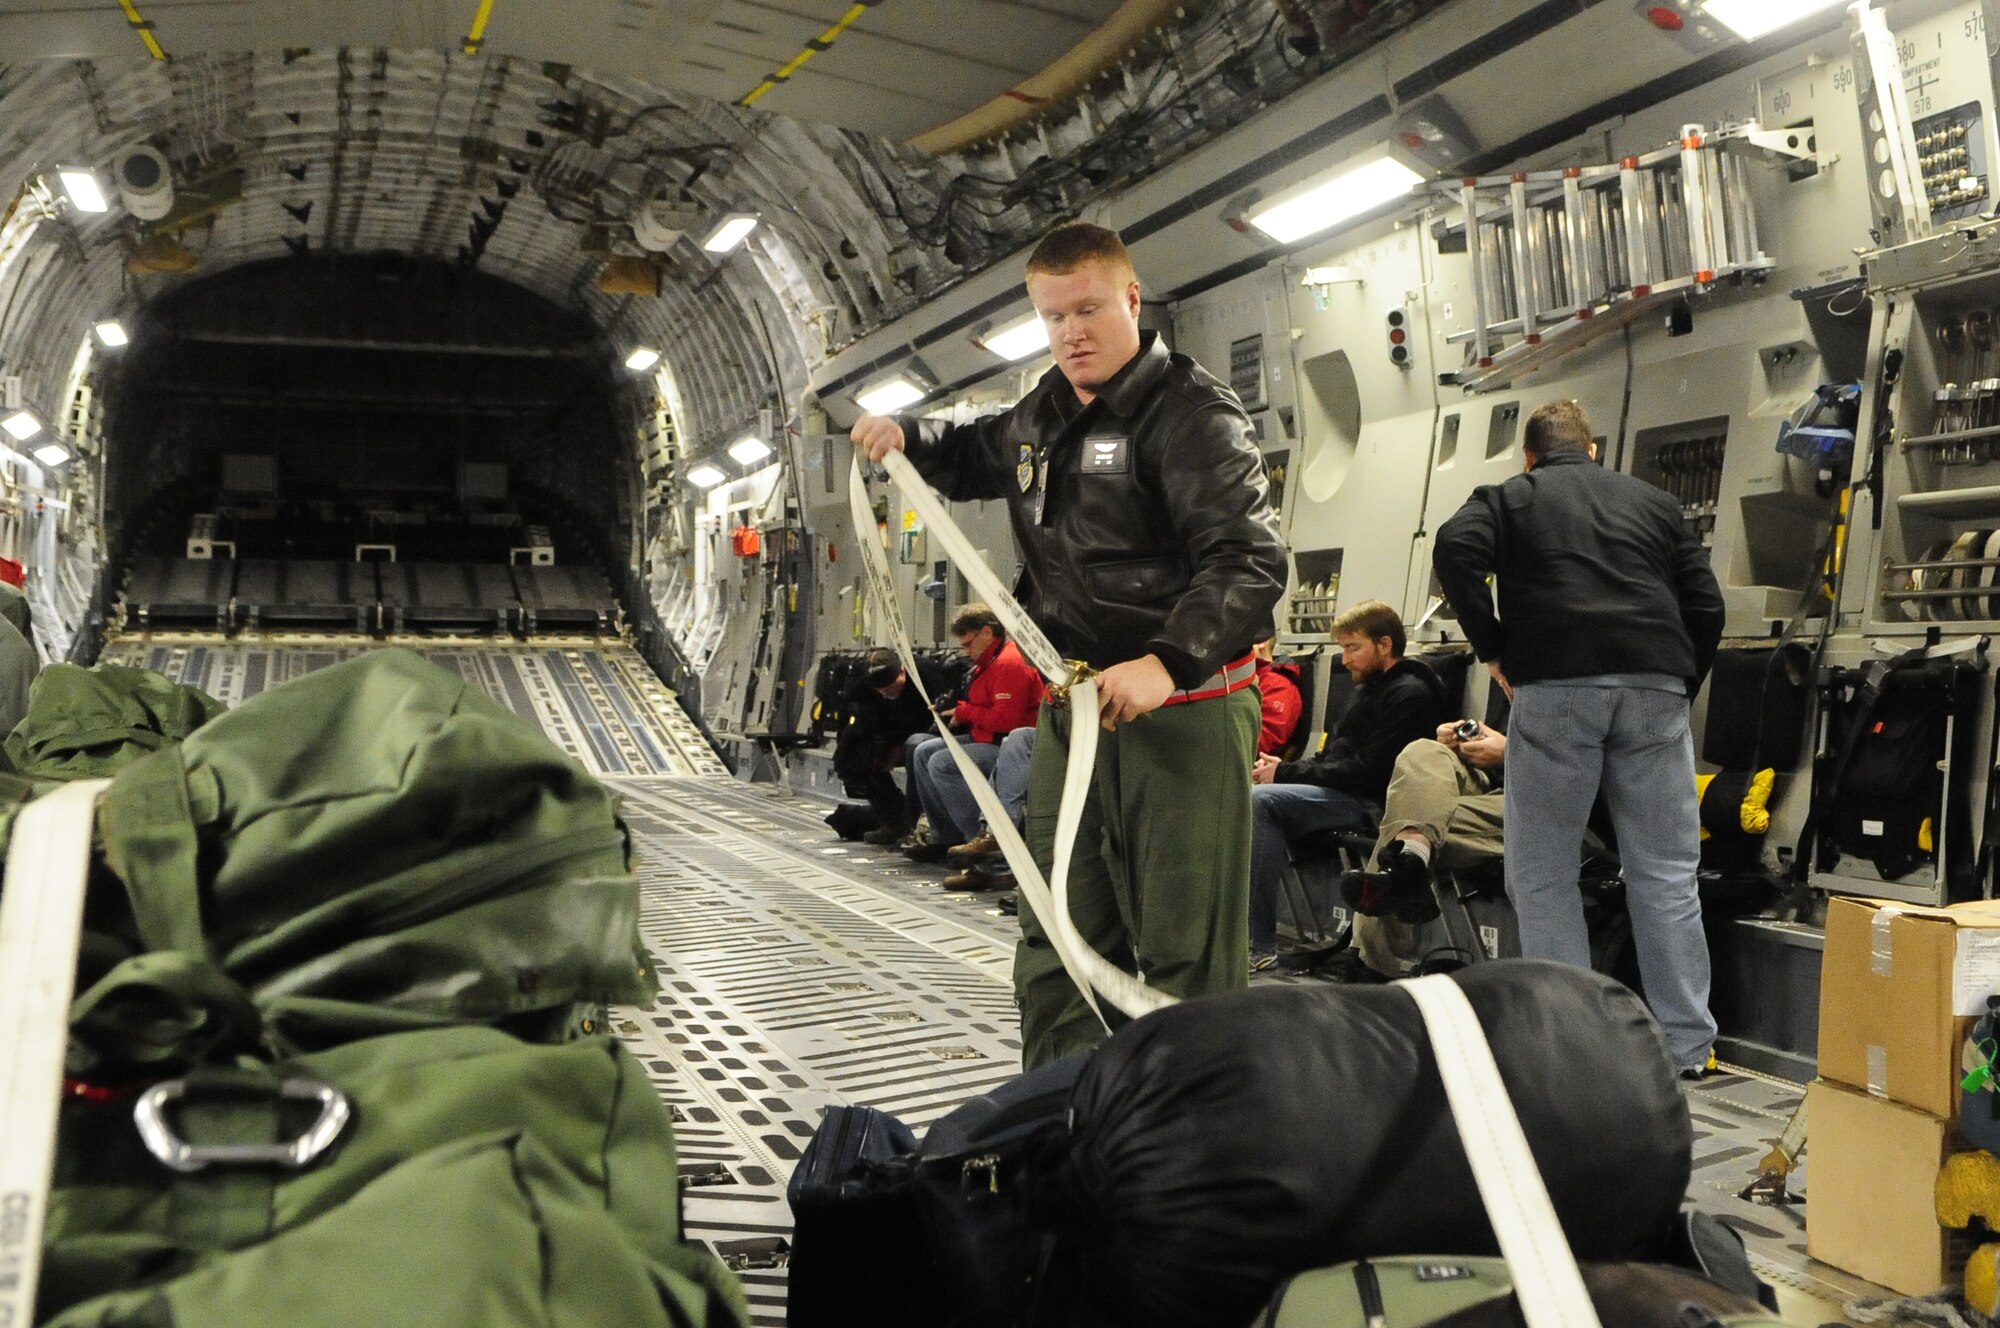 Staff Sgt. James Harp, 4th Airlift Squadron loadmaster, secures gear prior to takeoff Sunday morning for Langley Air Force Base, Va. Two additional C-17s were dispatched Sunday to Pope AFB, N.C. and Charleston AFB, S.C., respectively, to pick up critical supplies and deliver them to Haiti; a fourth C-17 departed Jan. 18 for Pope. (Courtesy photo)